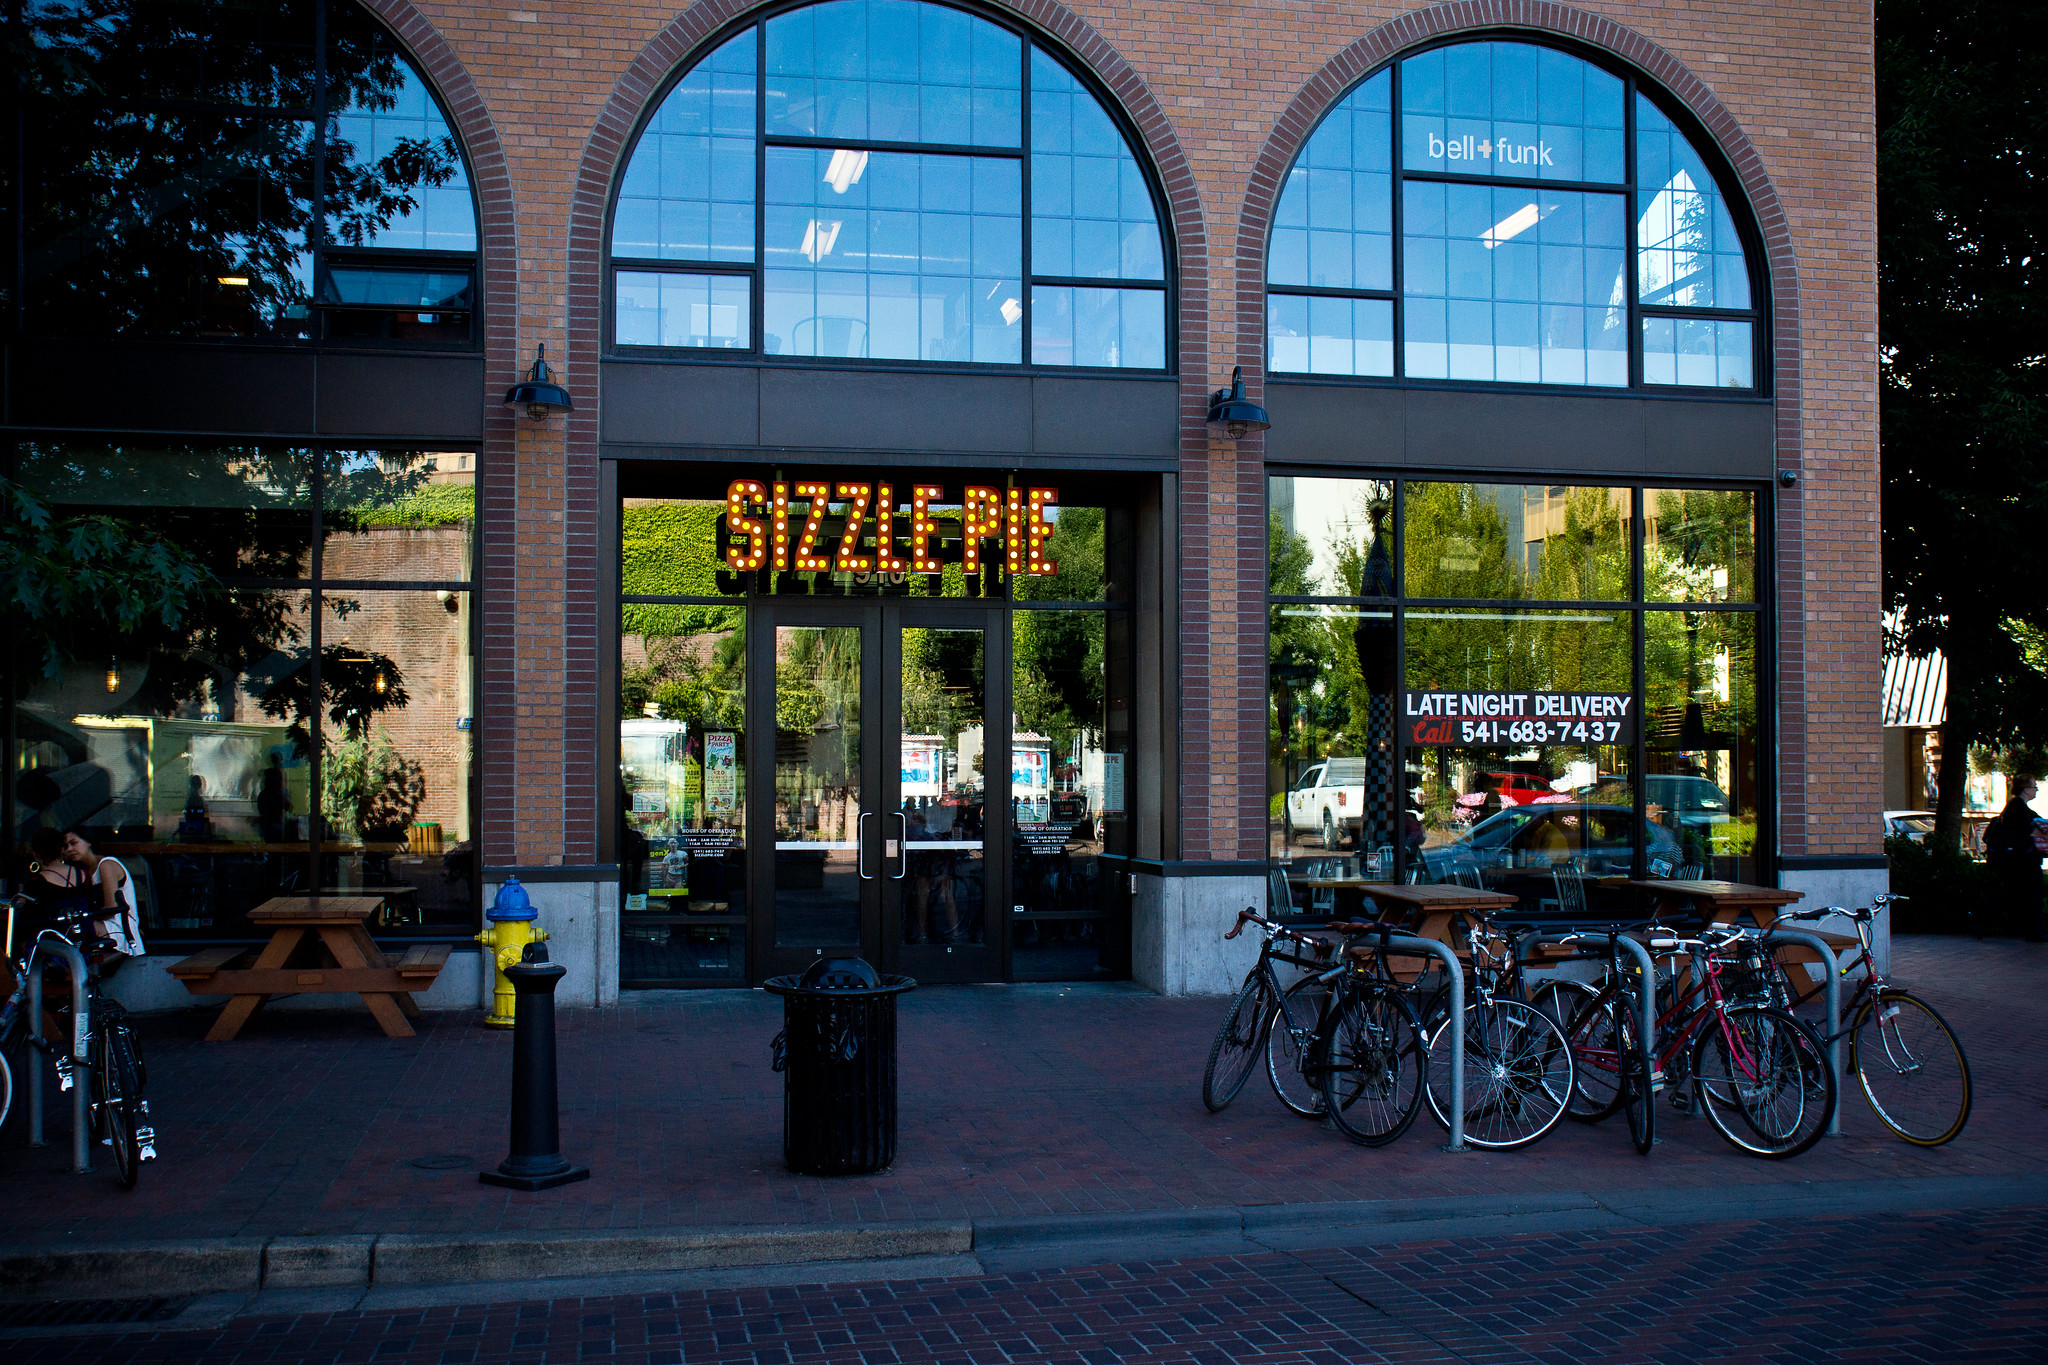 Explore local Eugene favorites such as Sizzle Pie, all within walking distance.